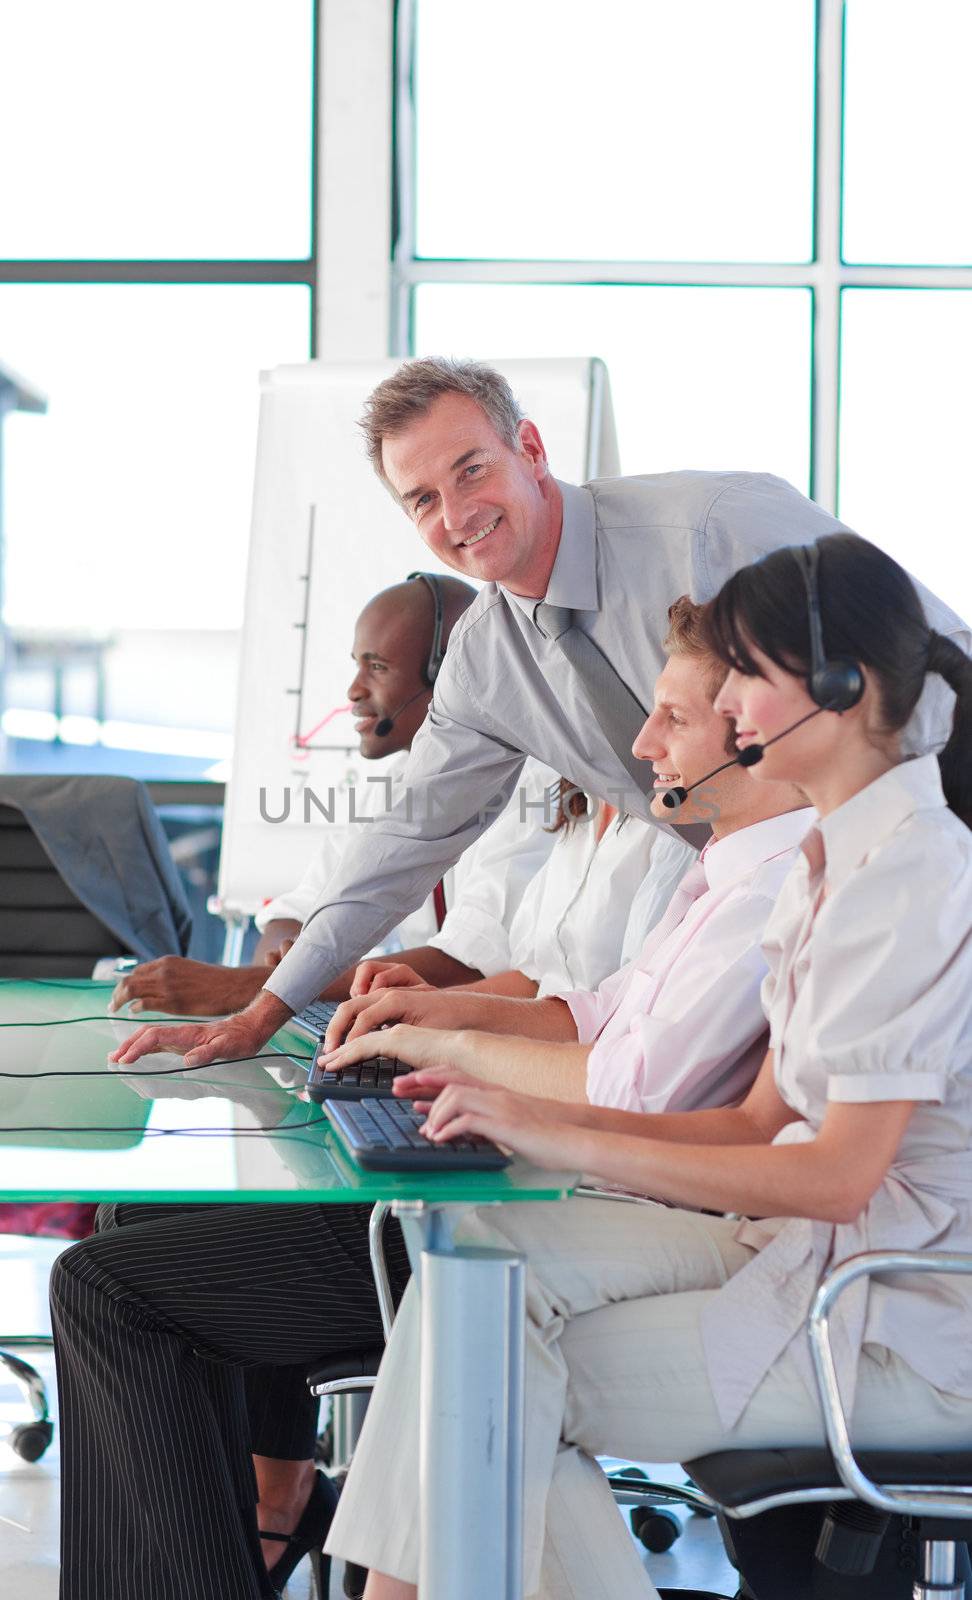 International business people working in a call centre